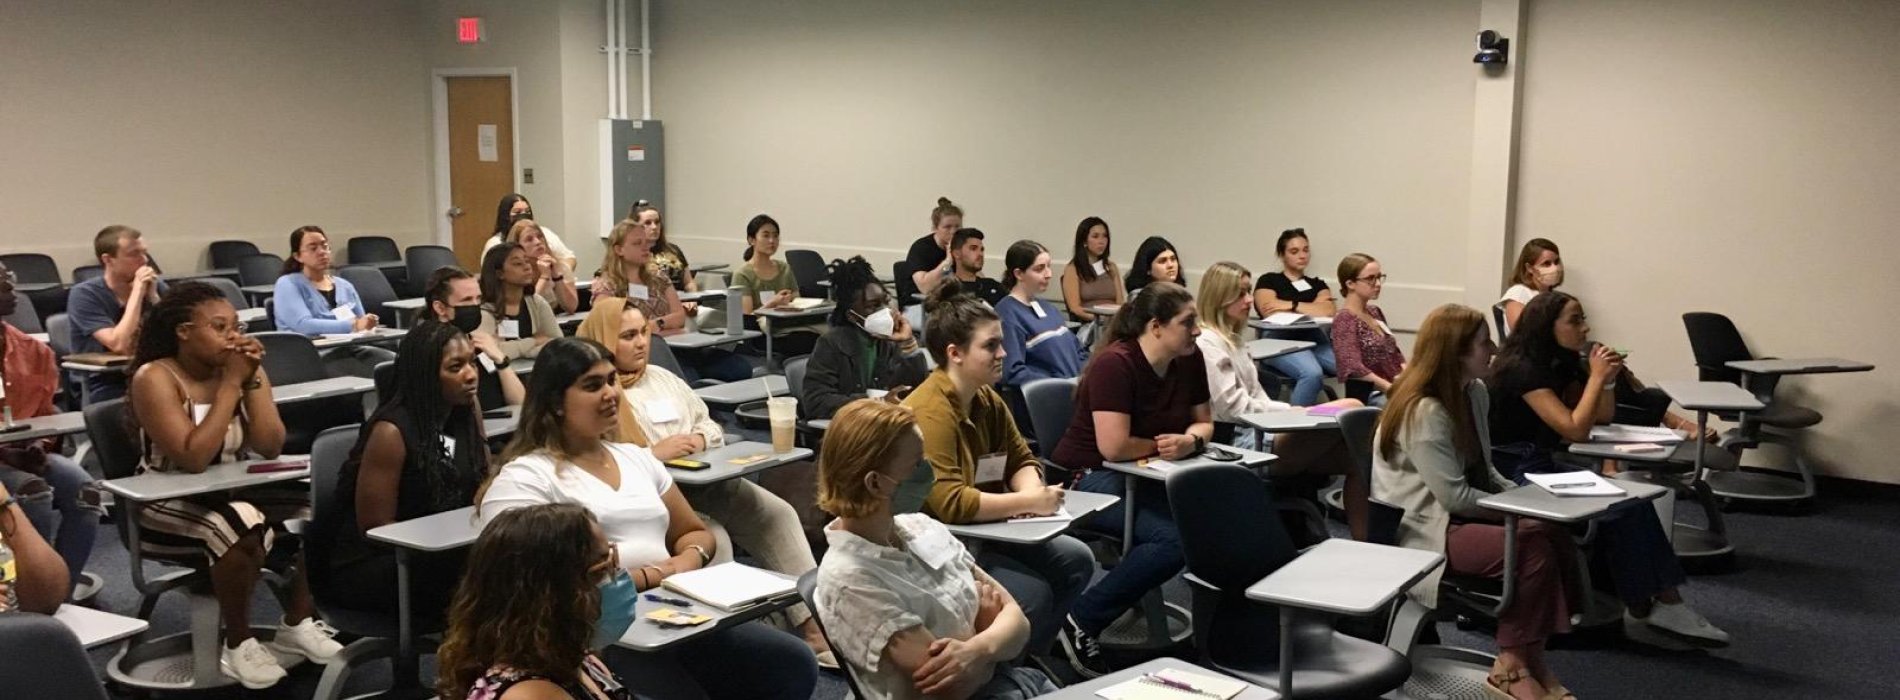 Students gathered in a classroom for the Global Health Fall Seminar Series